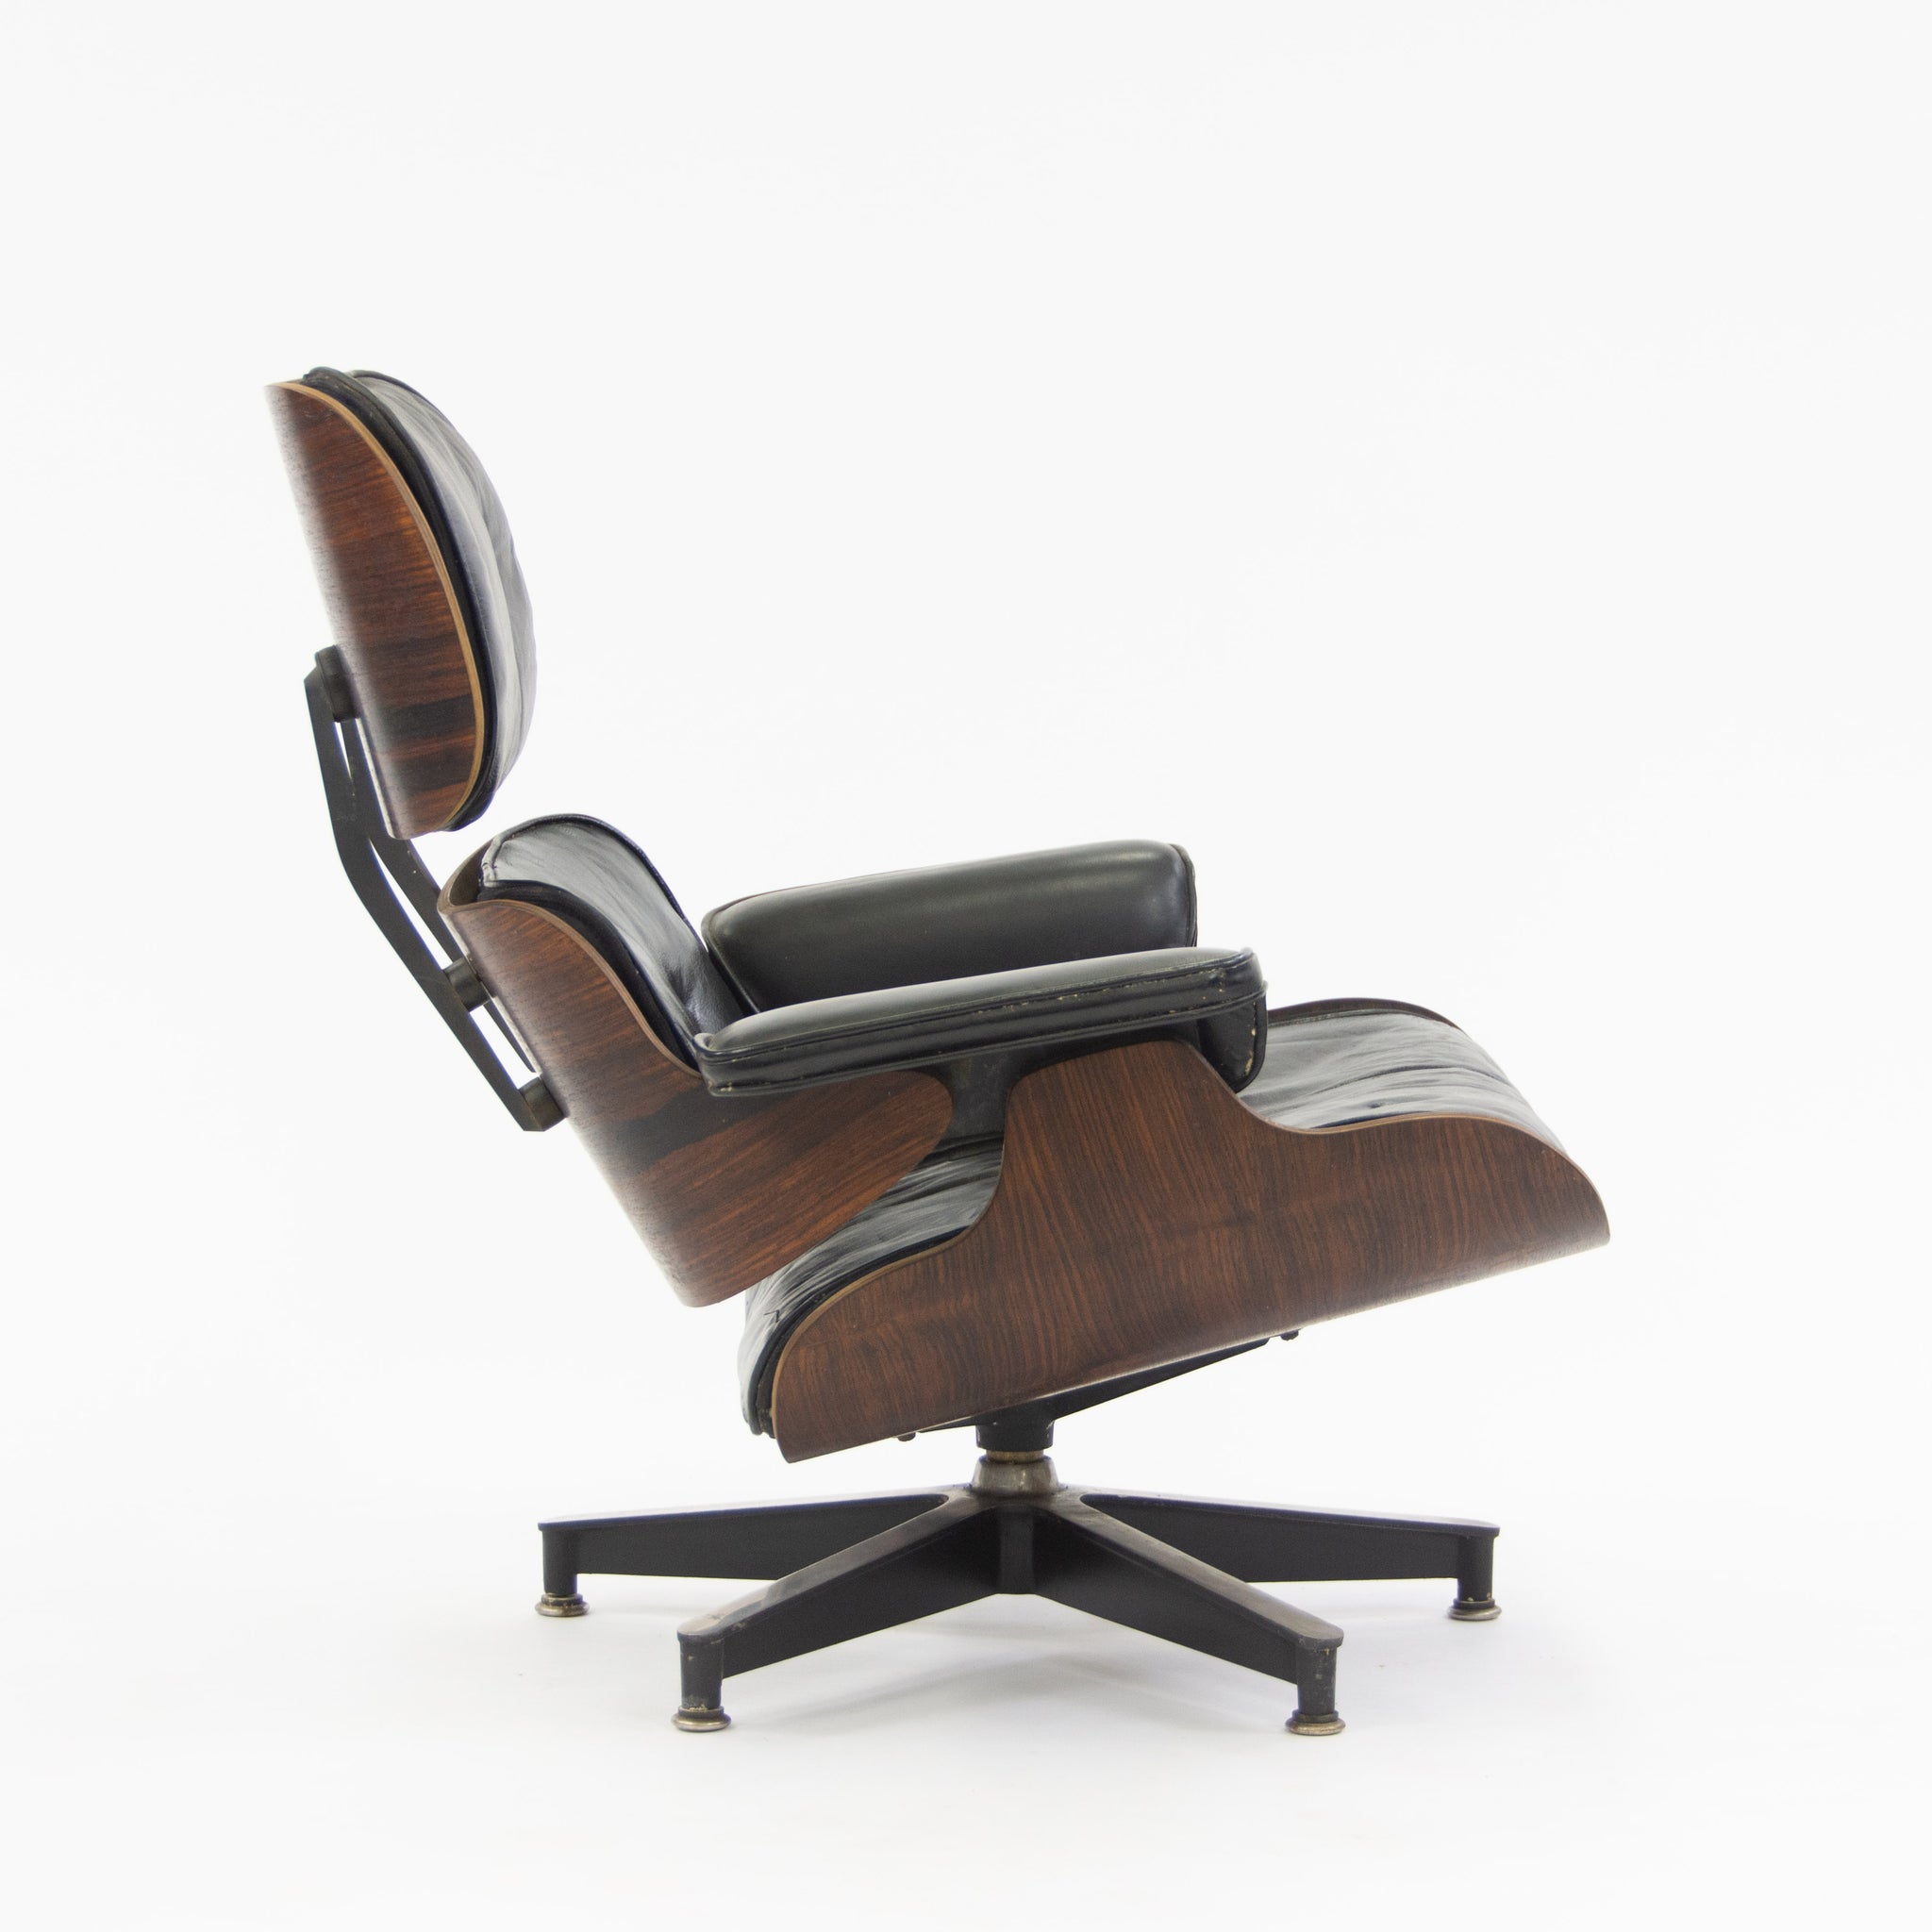 SOLD 1956 Herman Miller Eames Lounge Chair & Ottoman Rosewood 670 671 Black Leather